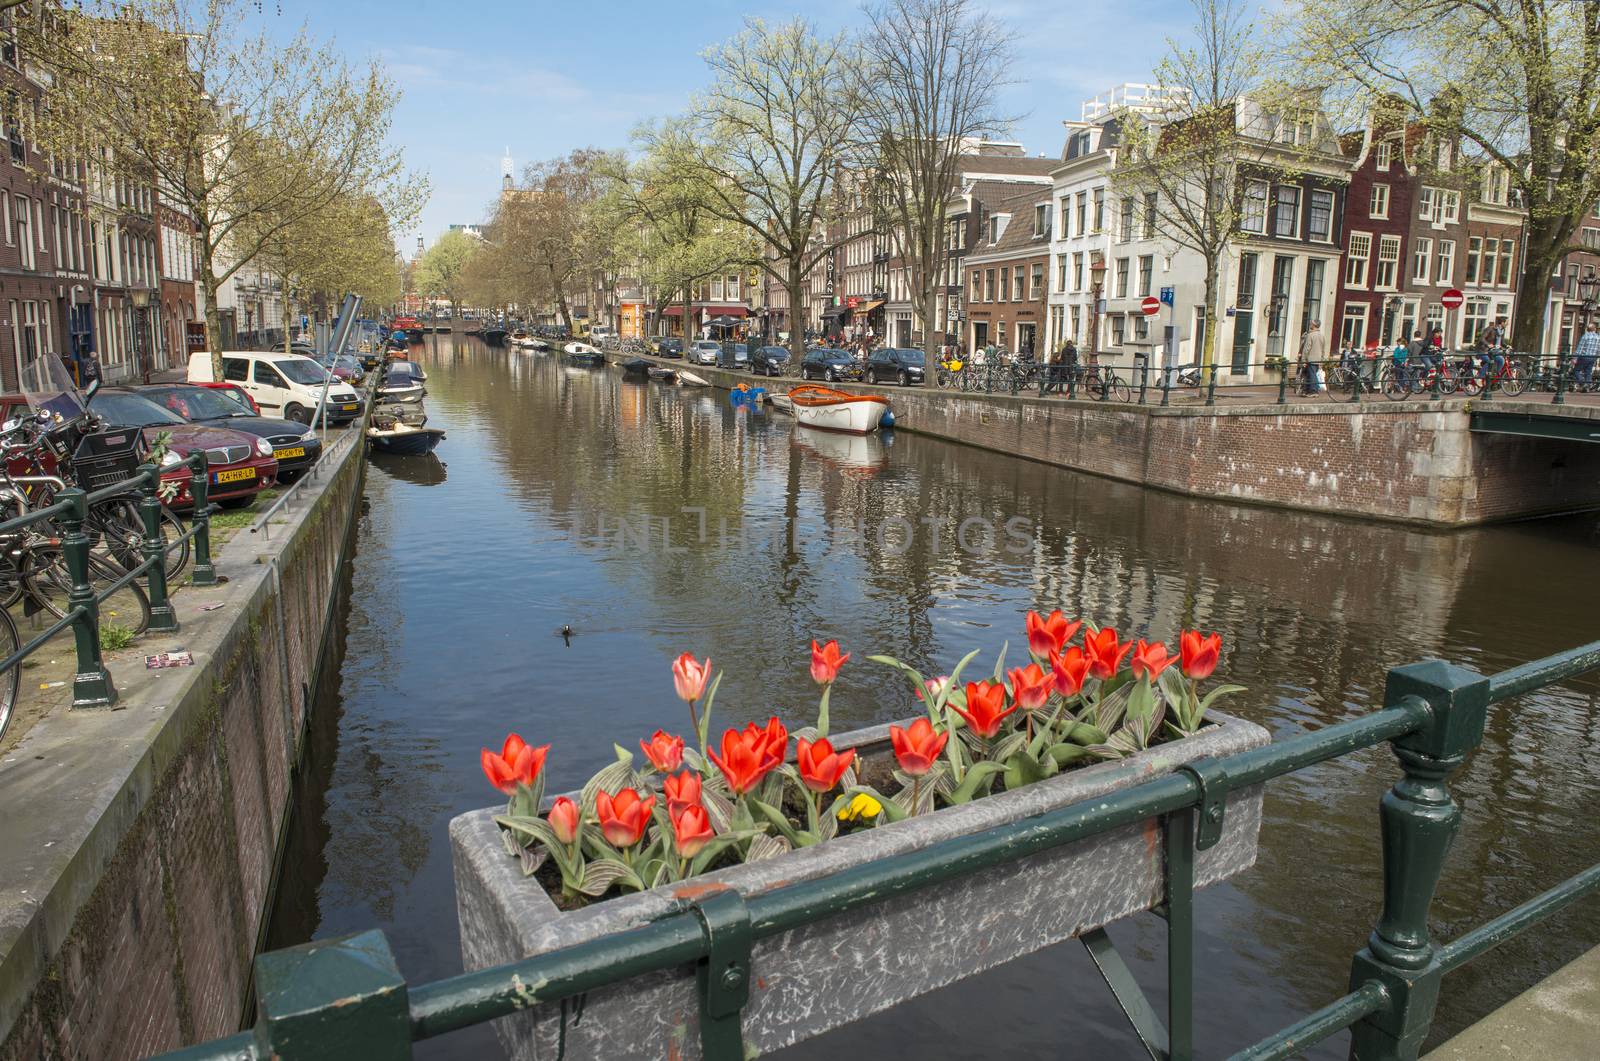 Amsterdam, The Netherlands - April 05, 2014: Amsterdam is the most watery city in the world. The number of canals have led Amsterdam to become known as “The Venice of the North”. 